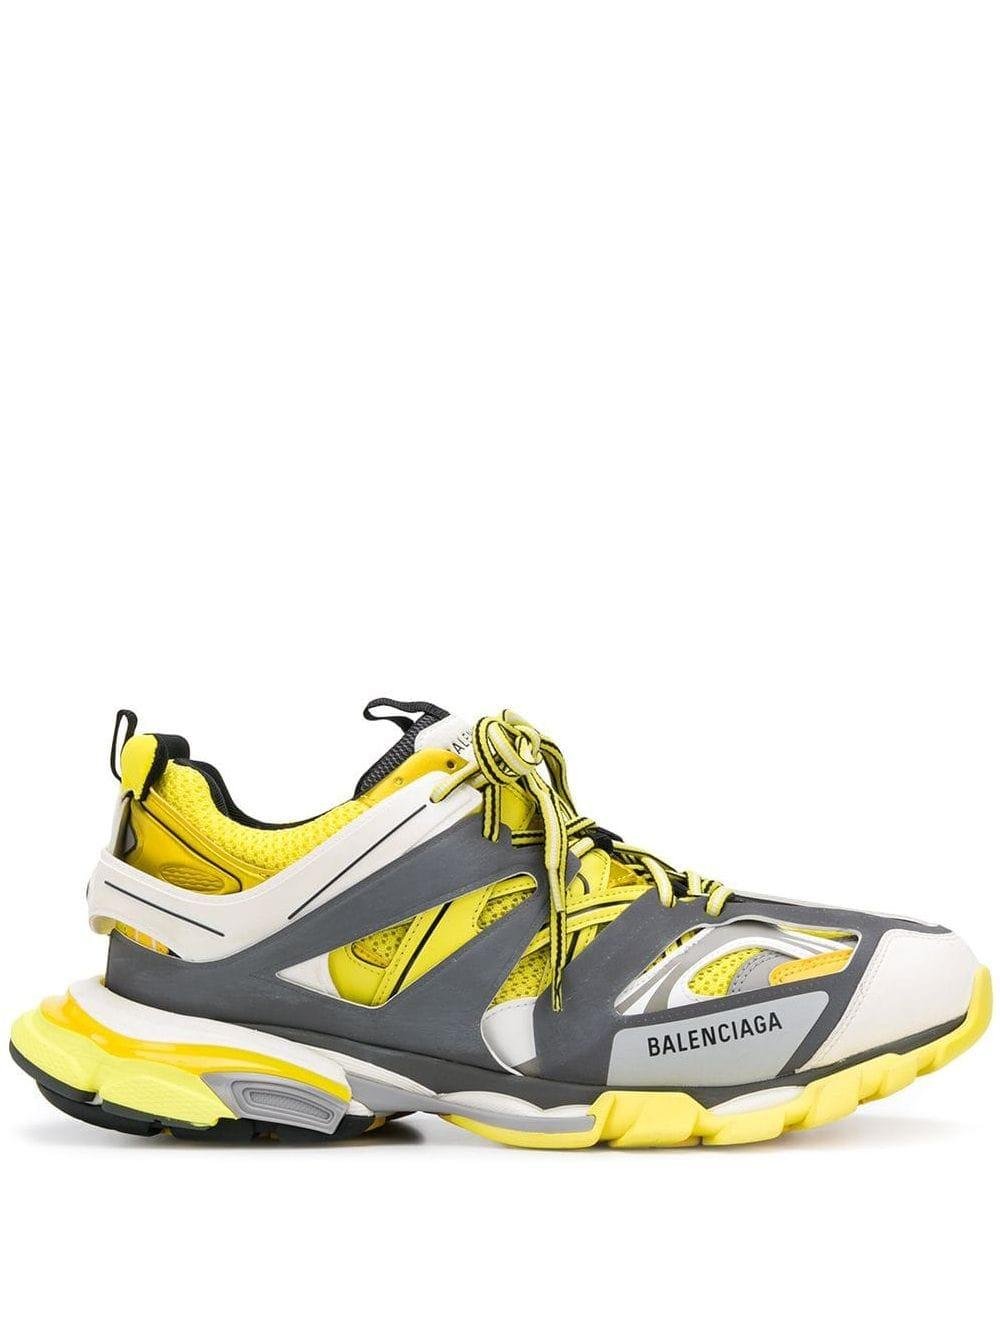 Balenciaga Rubber Track Trainers in Yellow/ Grey (Yellow) for Men - Lyst